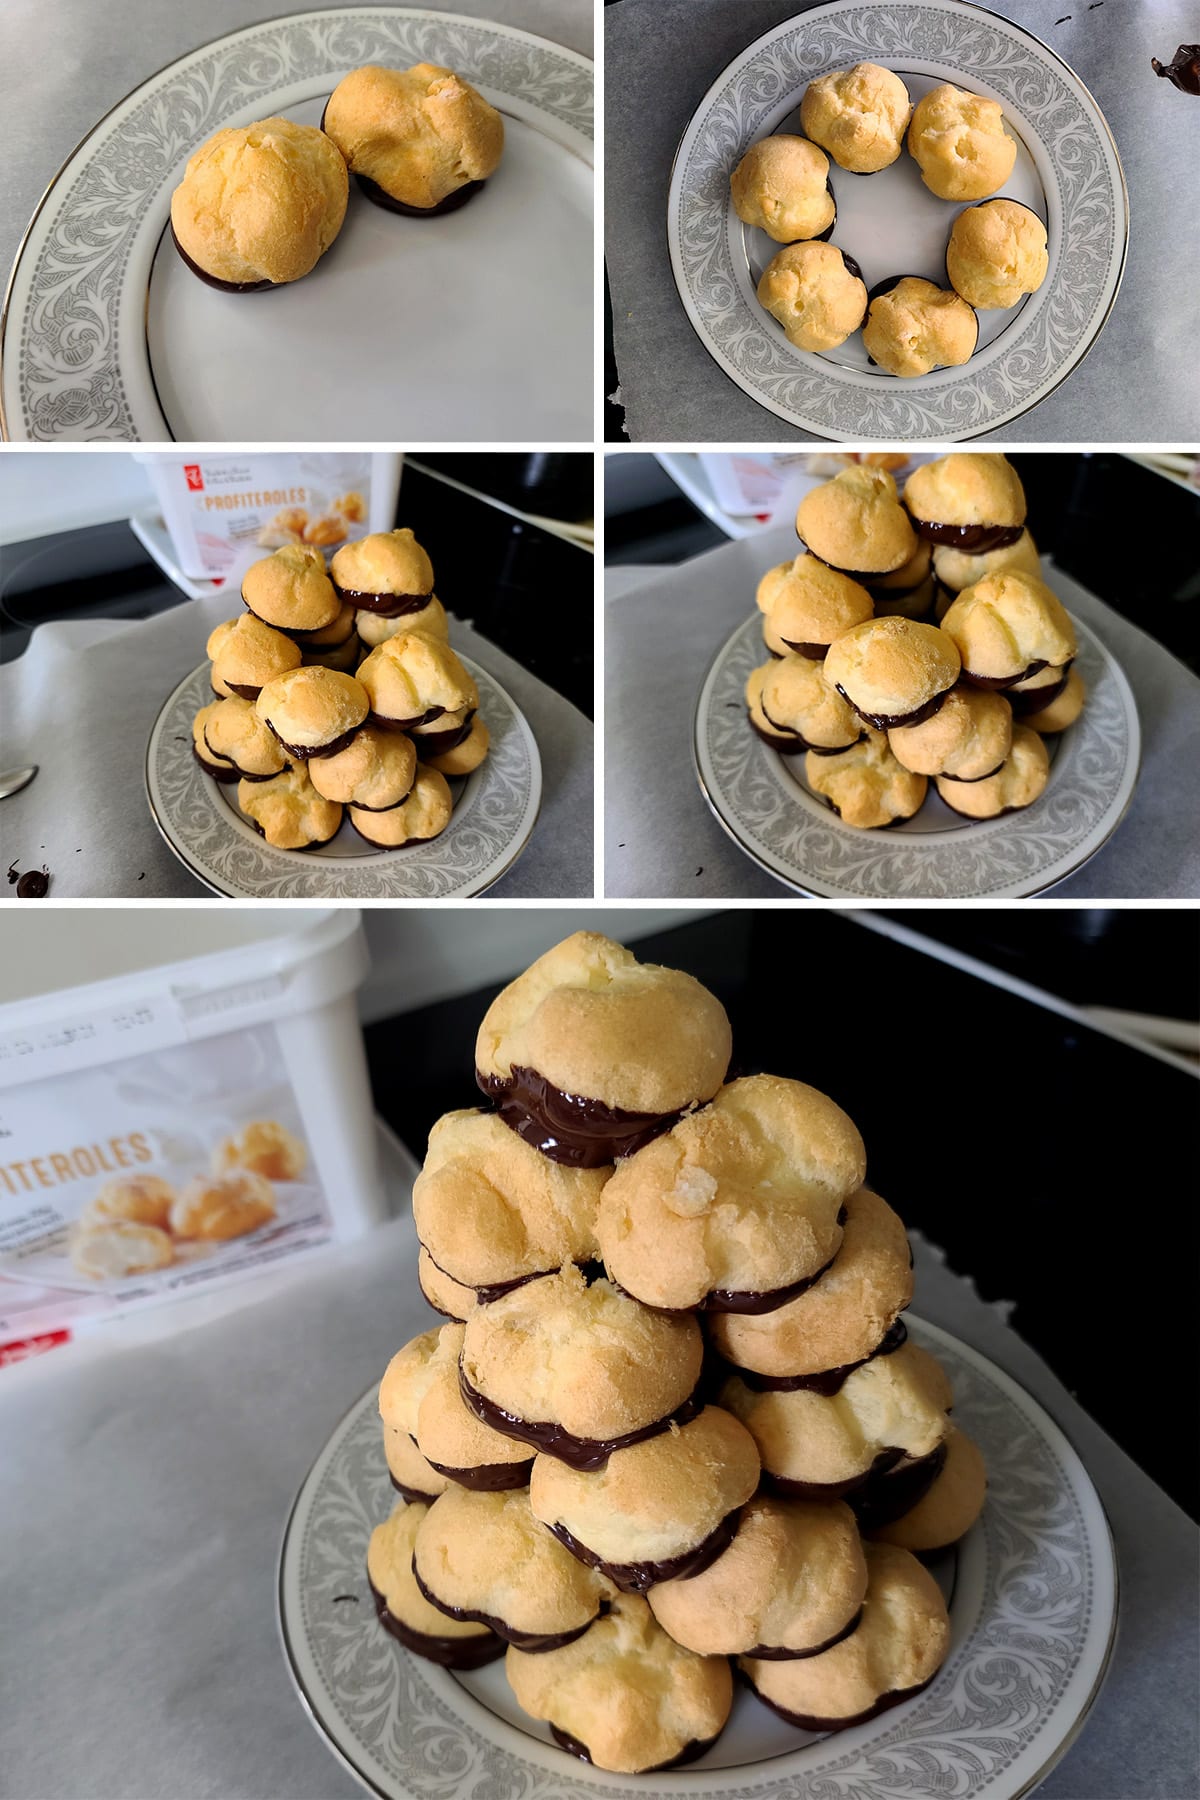 A 5 part image showing a small tower of chocolate croquembouche being made.